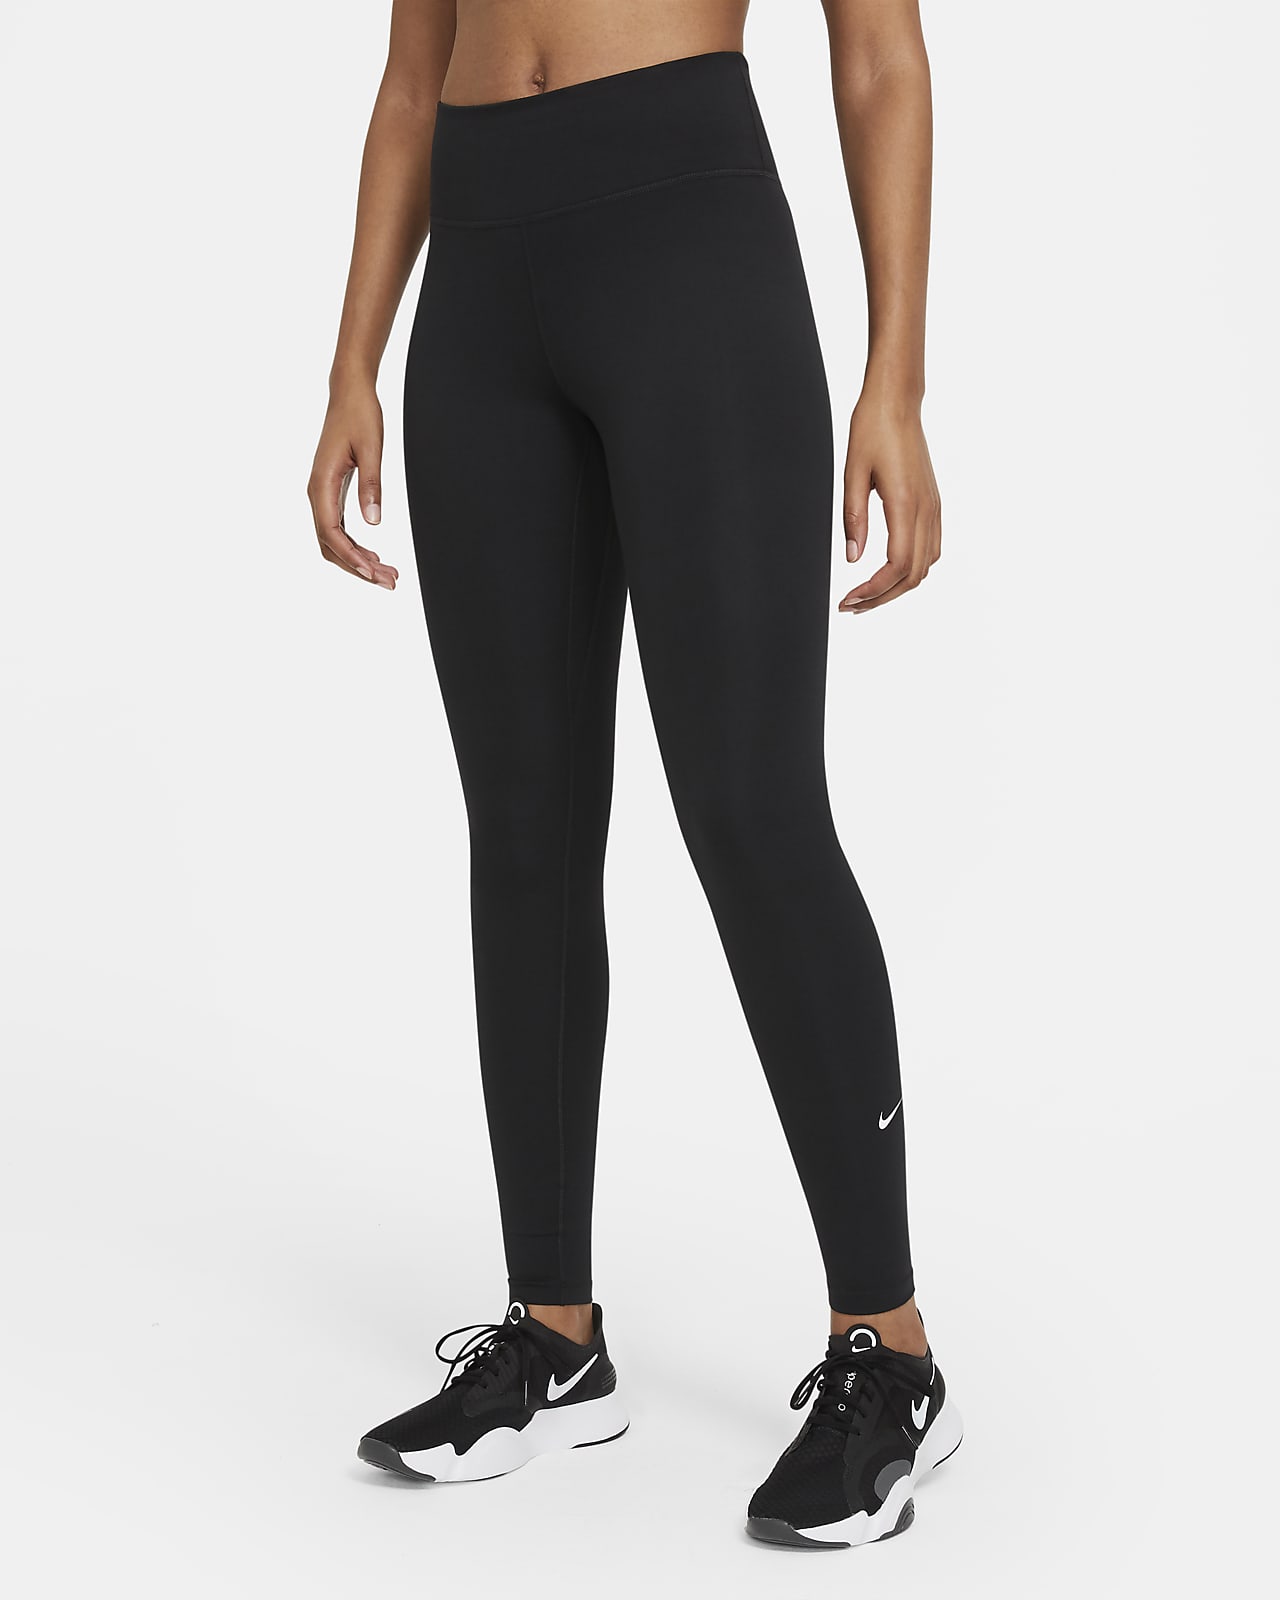 Legging taille mi-basse Nike One pour Femme. Nike CH